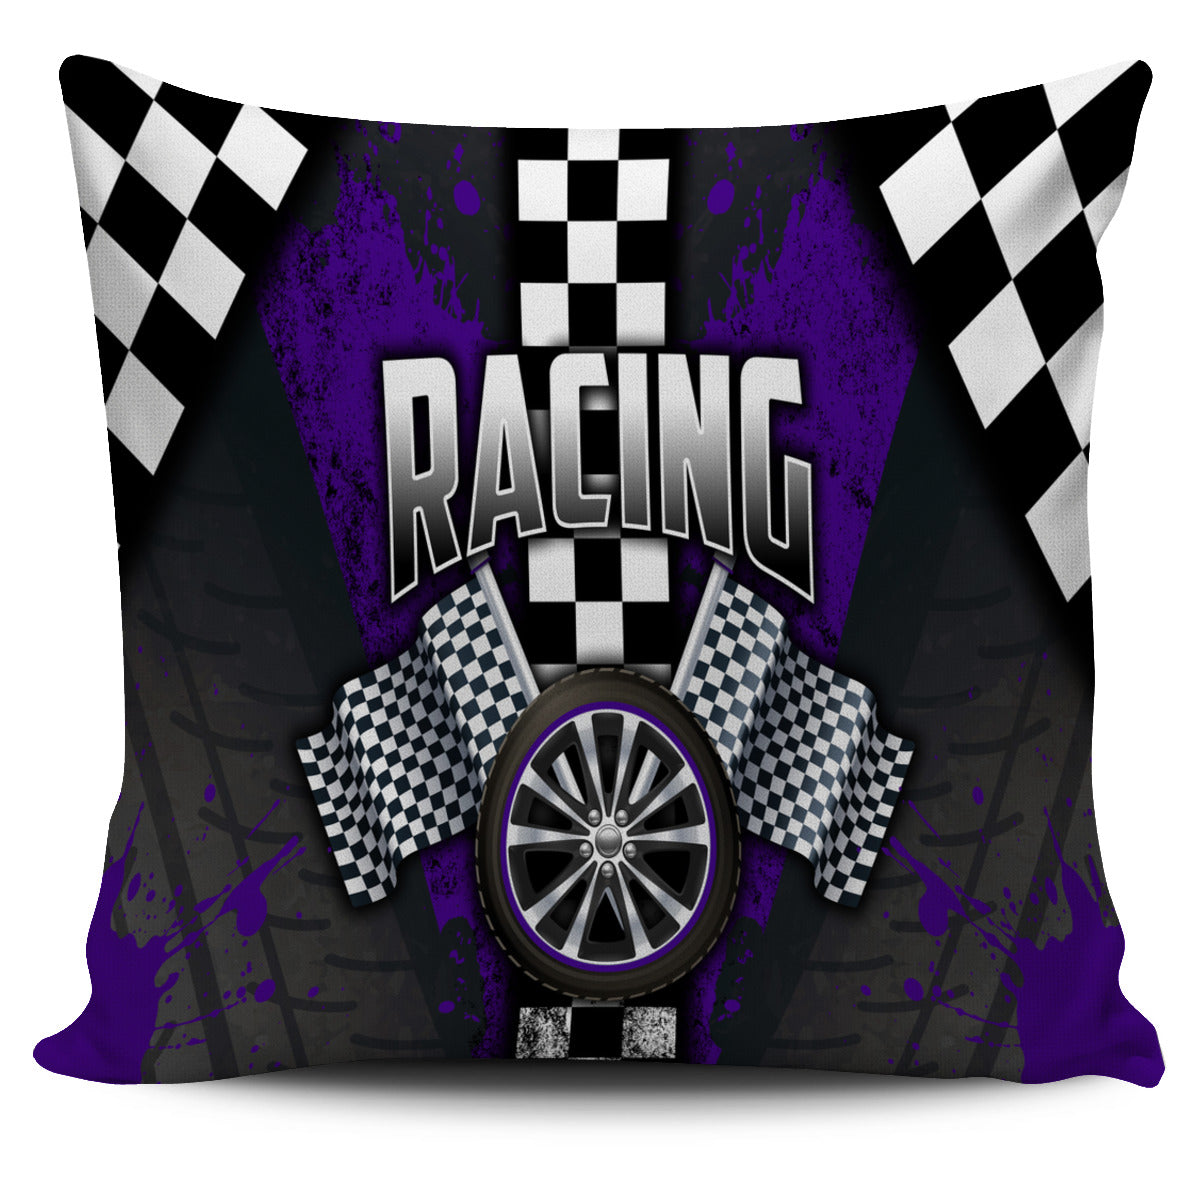 Racing Pillow Cover Purple